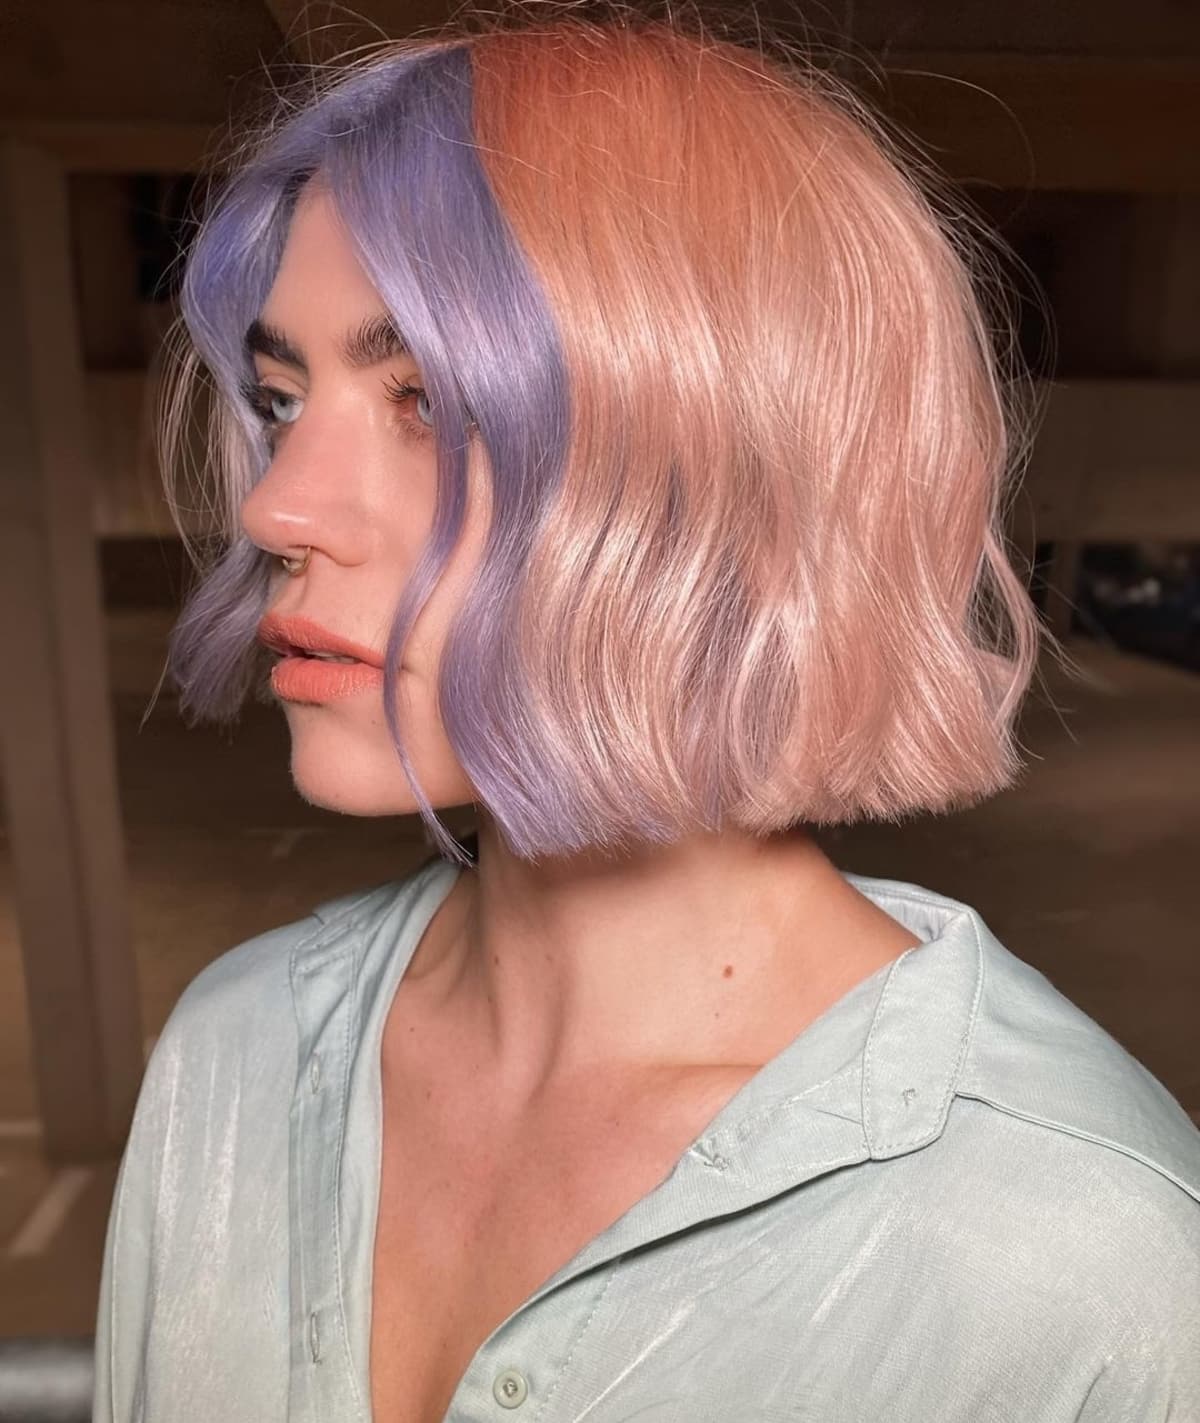 22 Perfect Examples of Lavender Hair Colors To Try